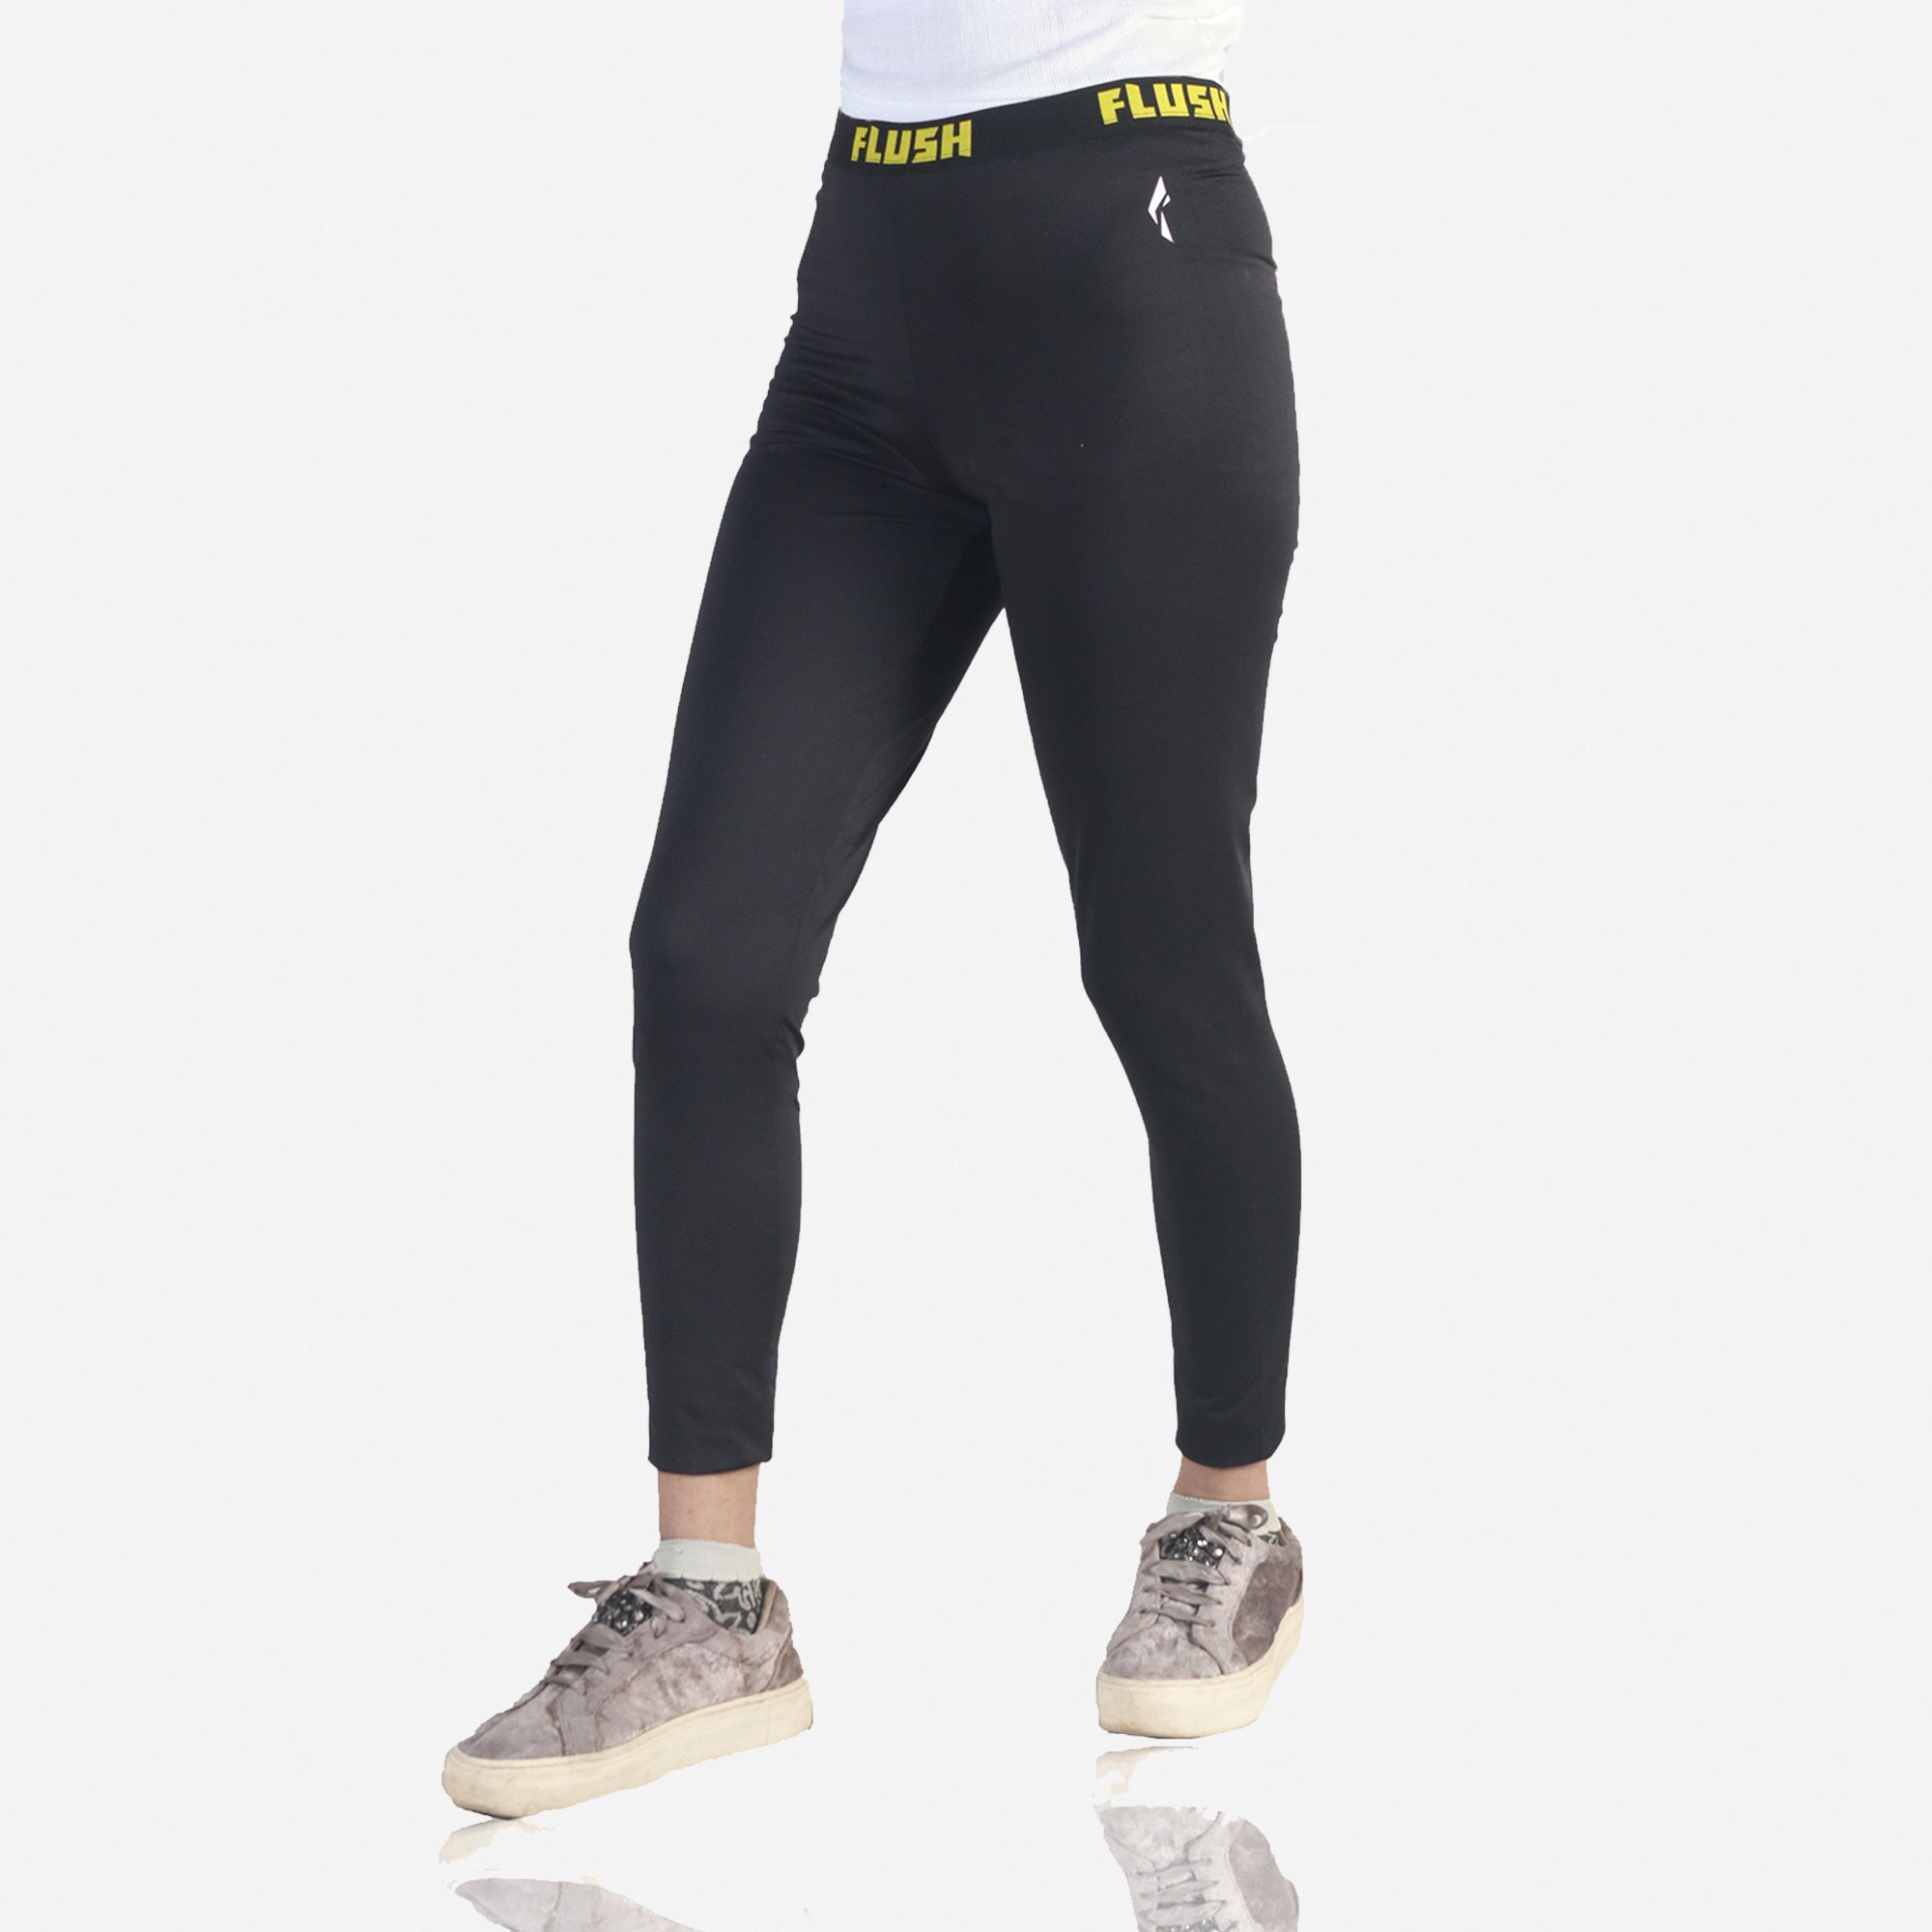 Women’s Base Layer Workout Athletic Leggings With Strip - Black